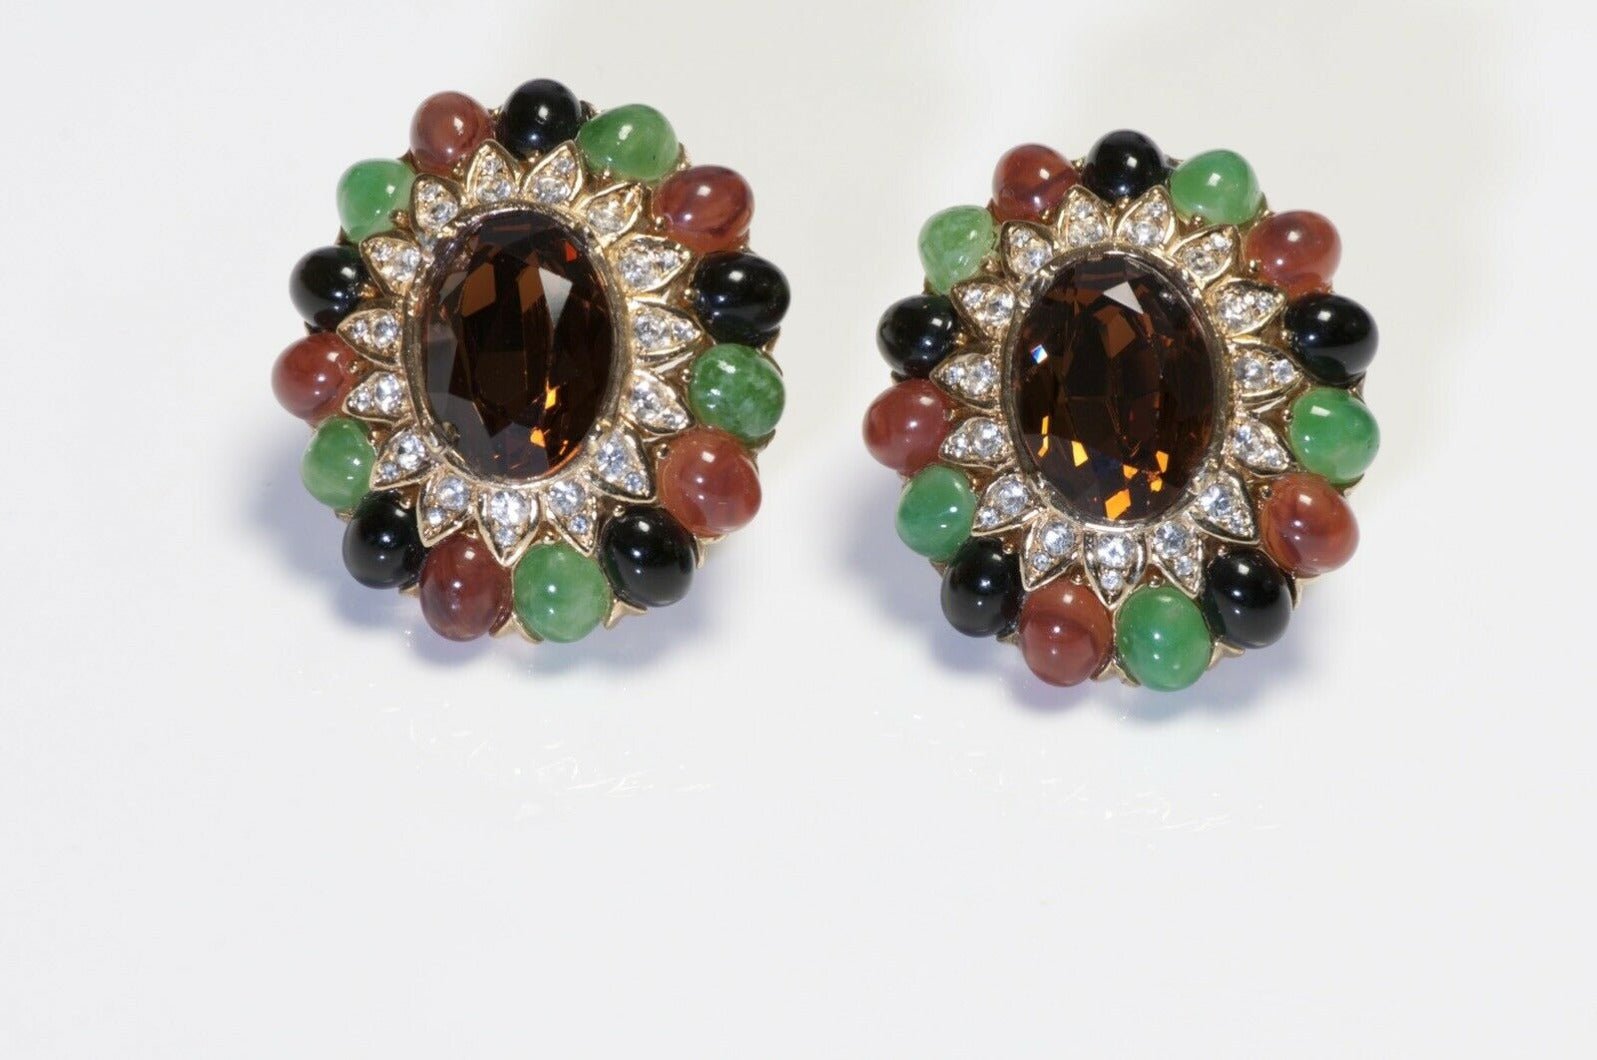 CINER Crystal Cabochon Glass Mughal Style Brooch Earrings Set